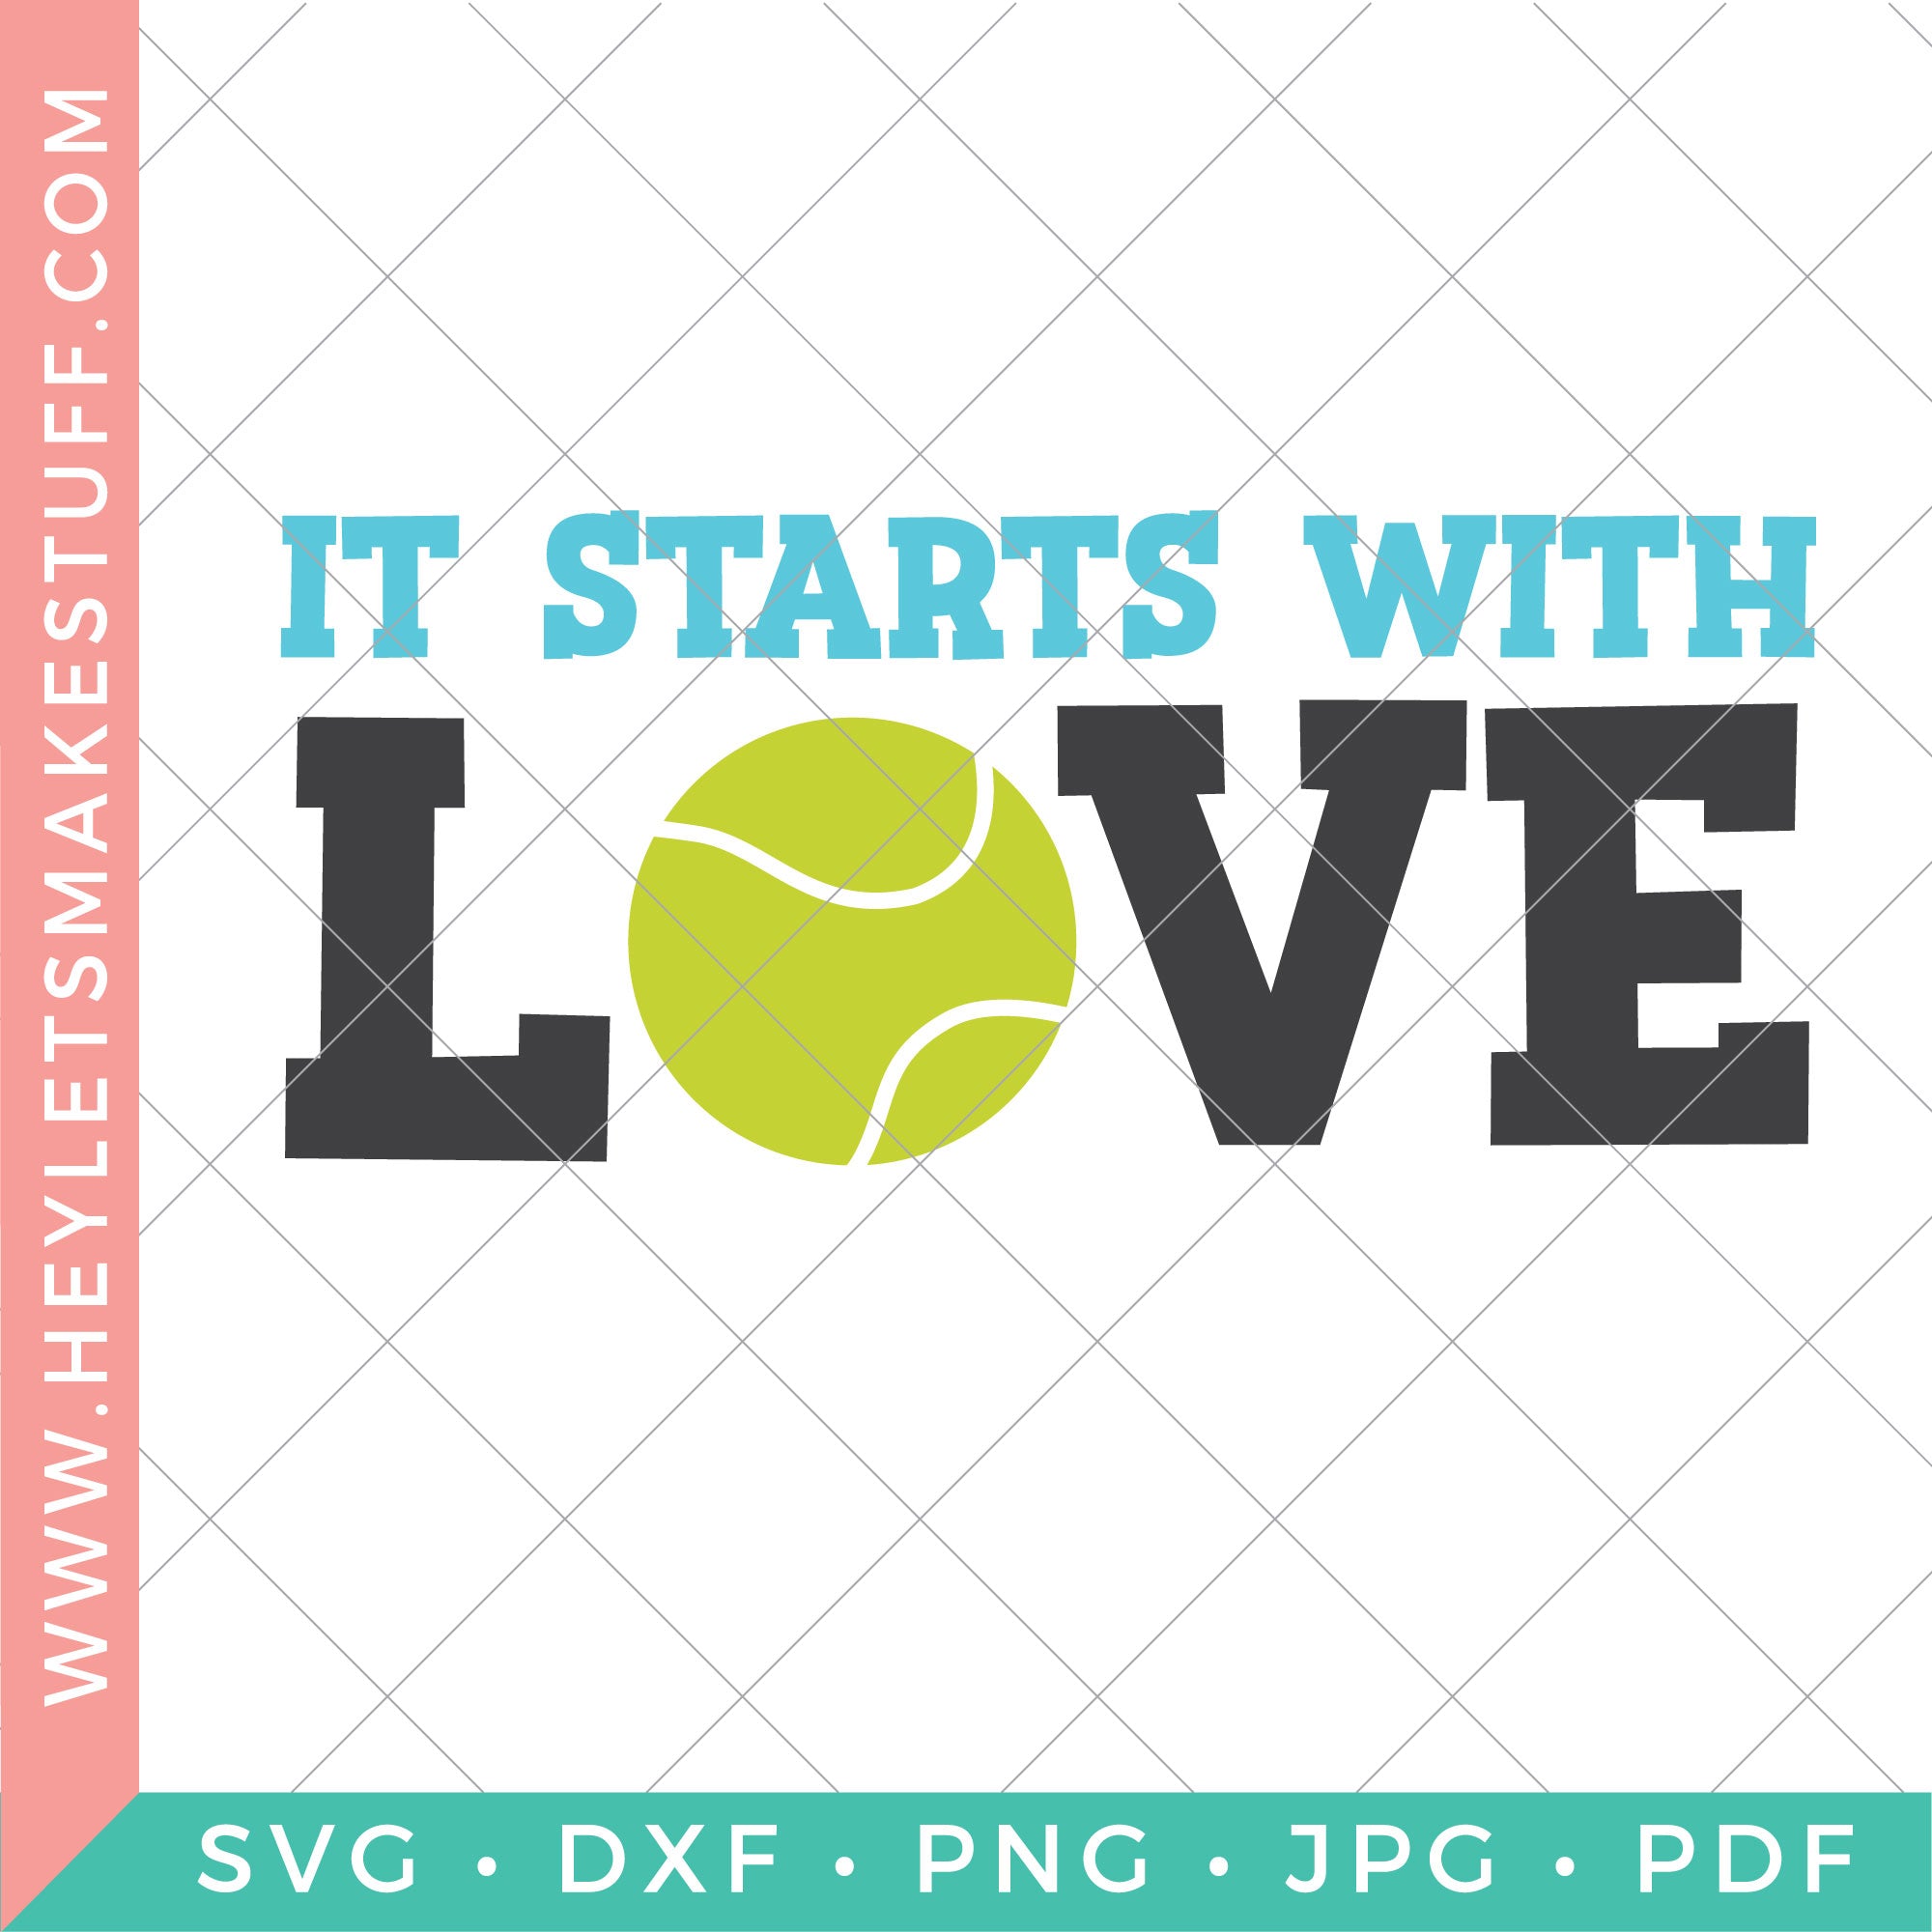 Four Tennis Svg Files To Ace Your Match Hey Let S Make Stuff